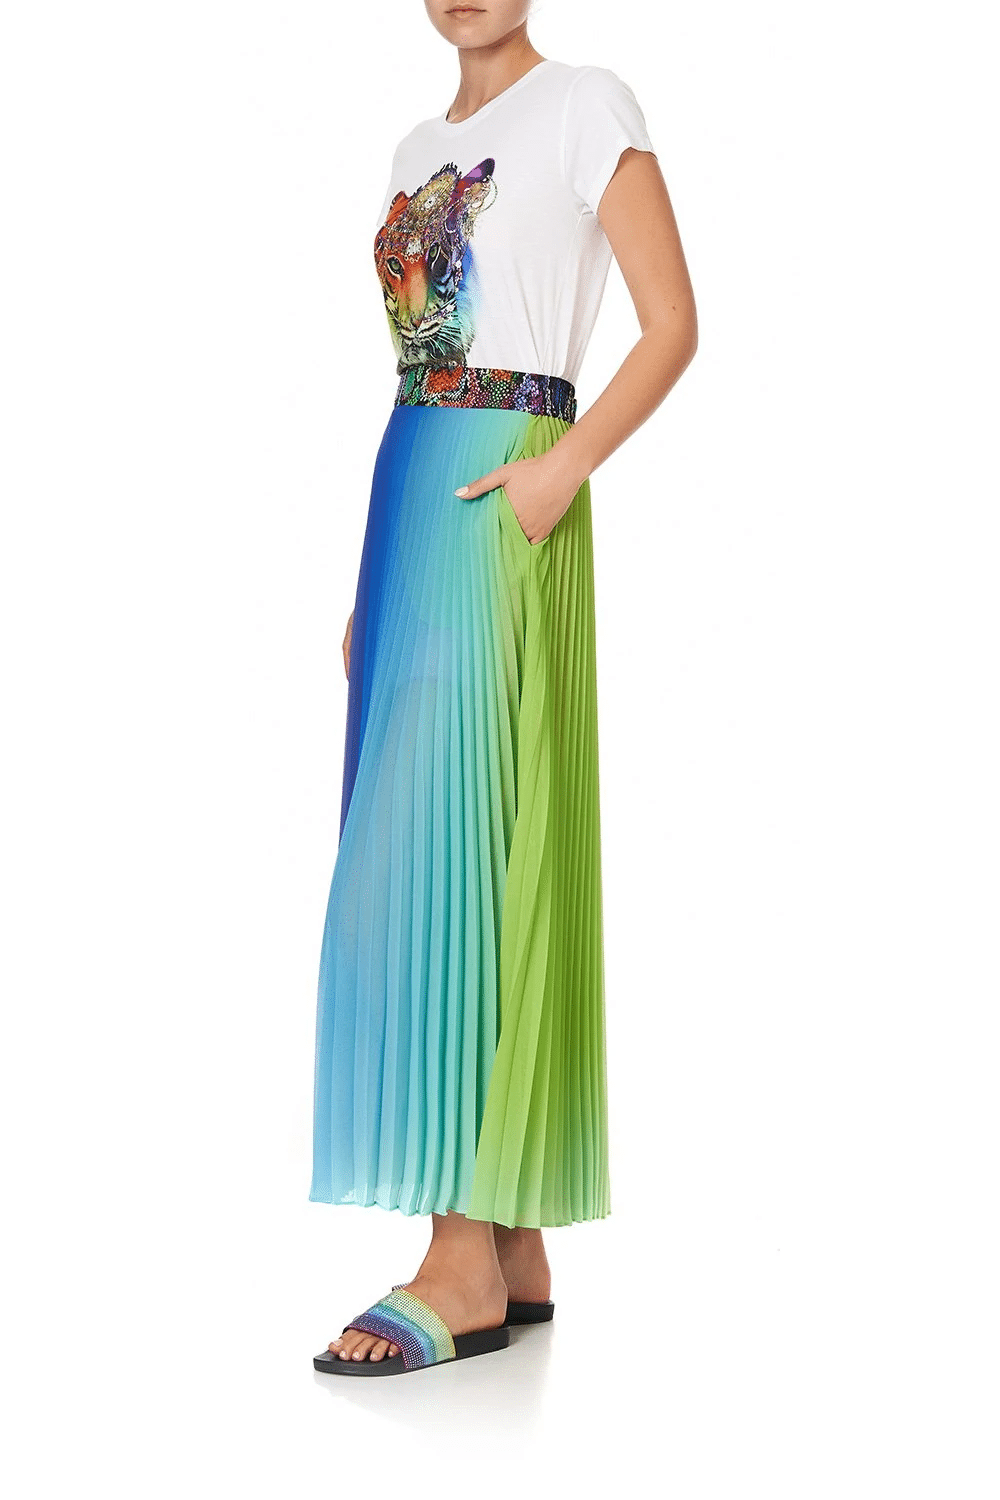 Embellished Maxi Skirt from Camilla